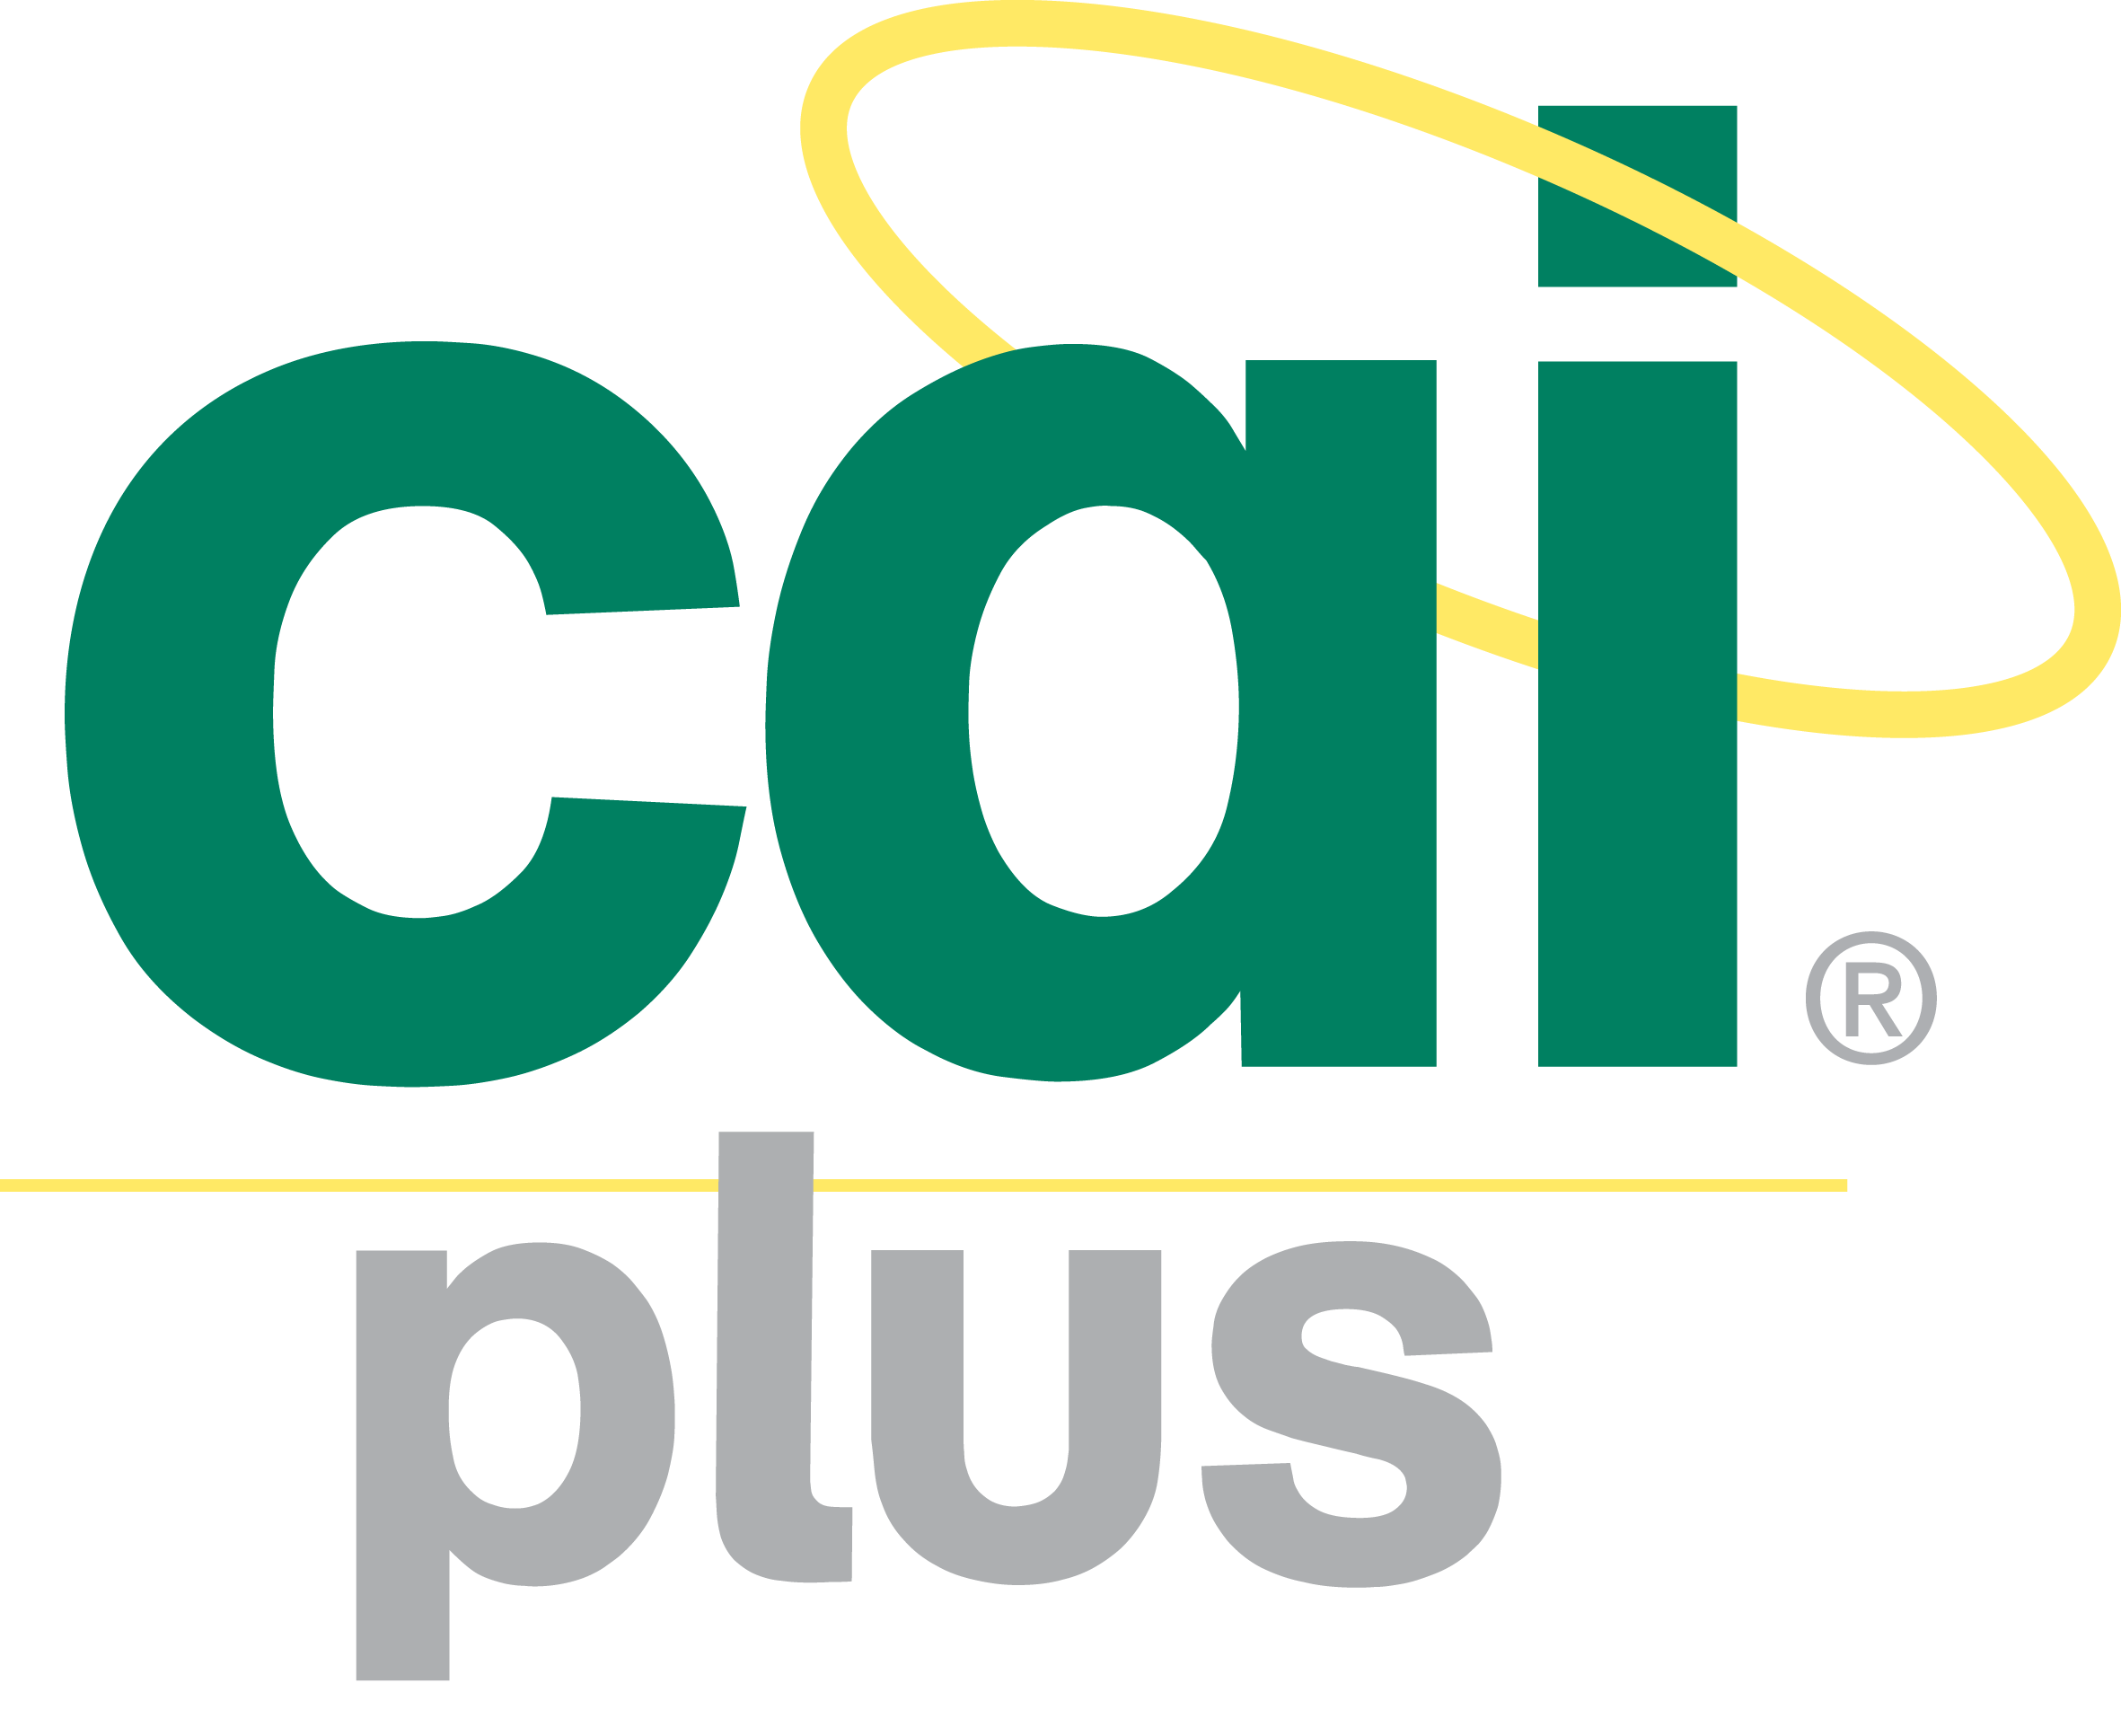 Aerial Installers in Shropshire with CAI Plus Certification